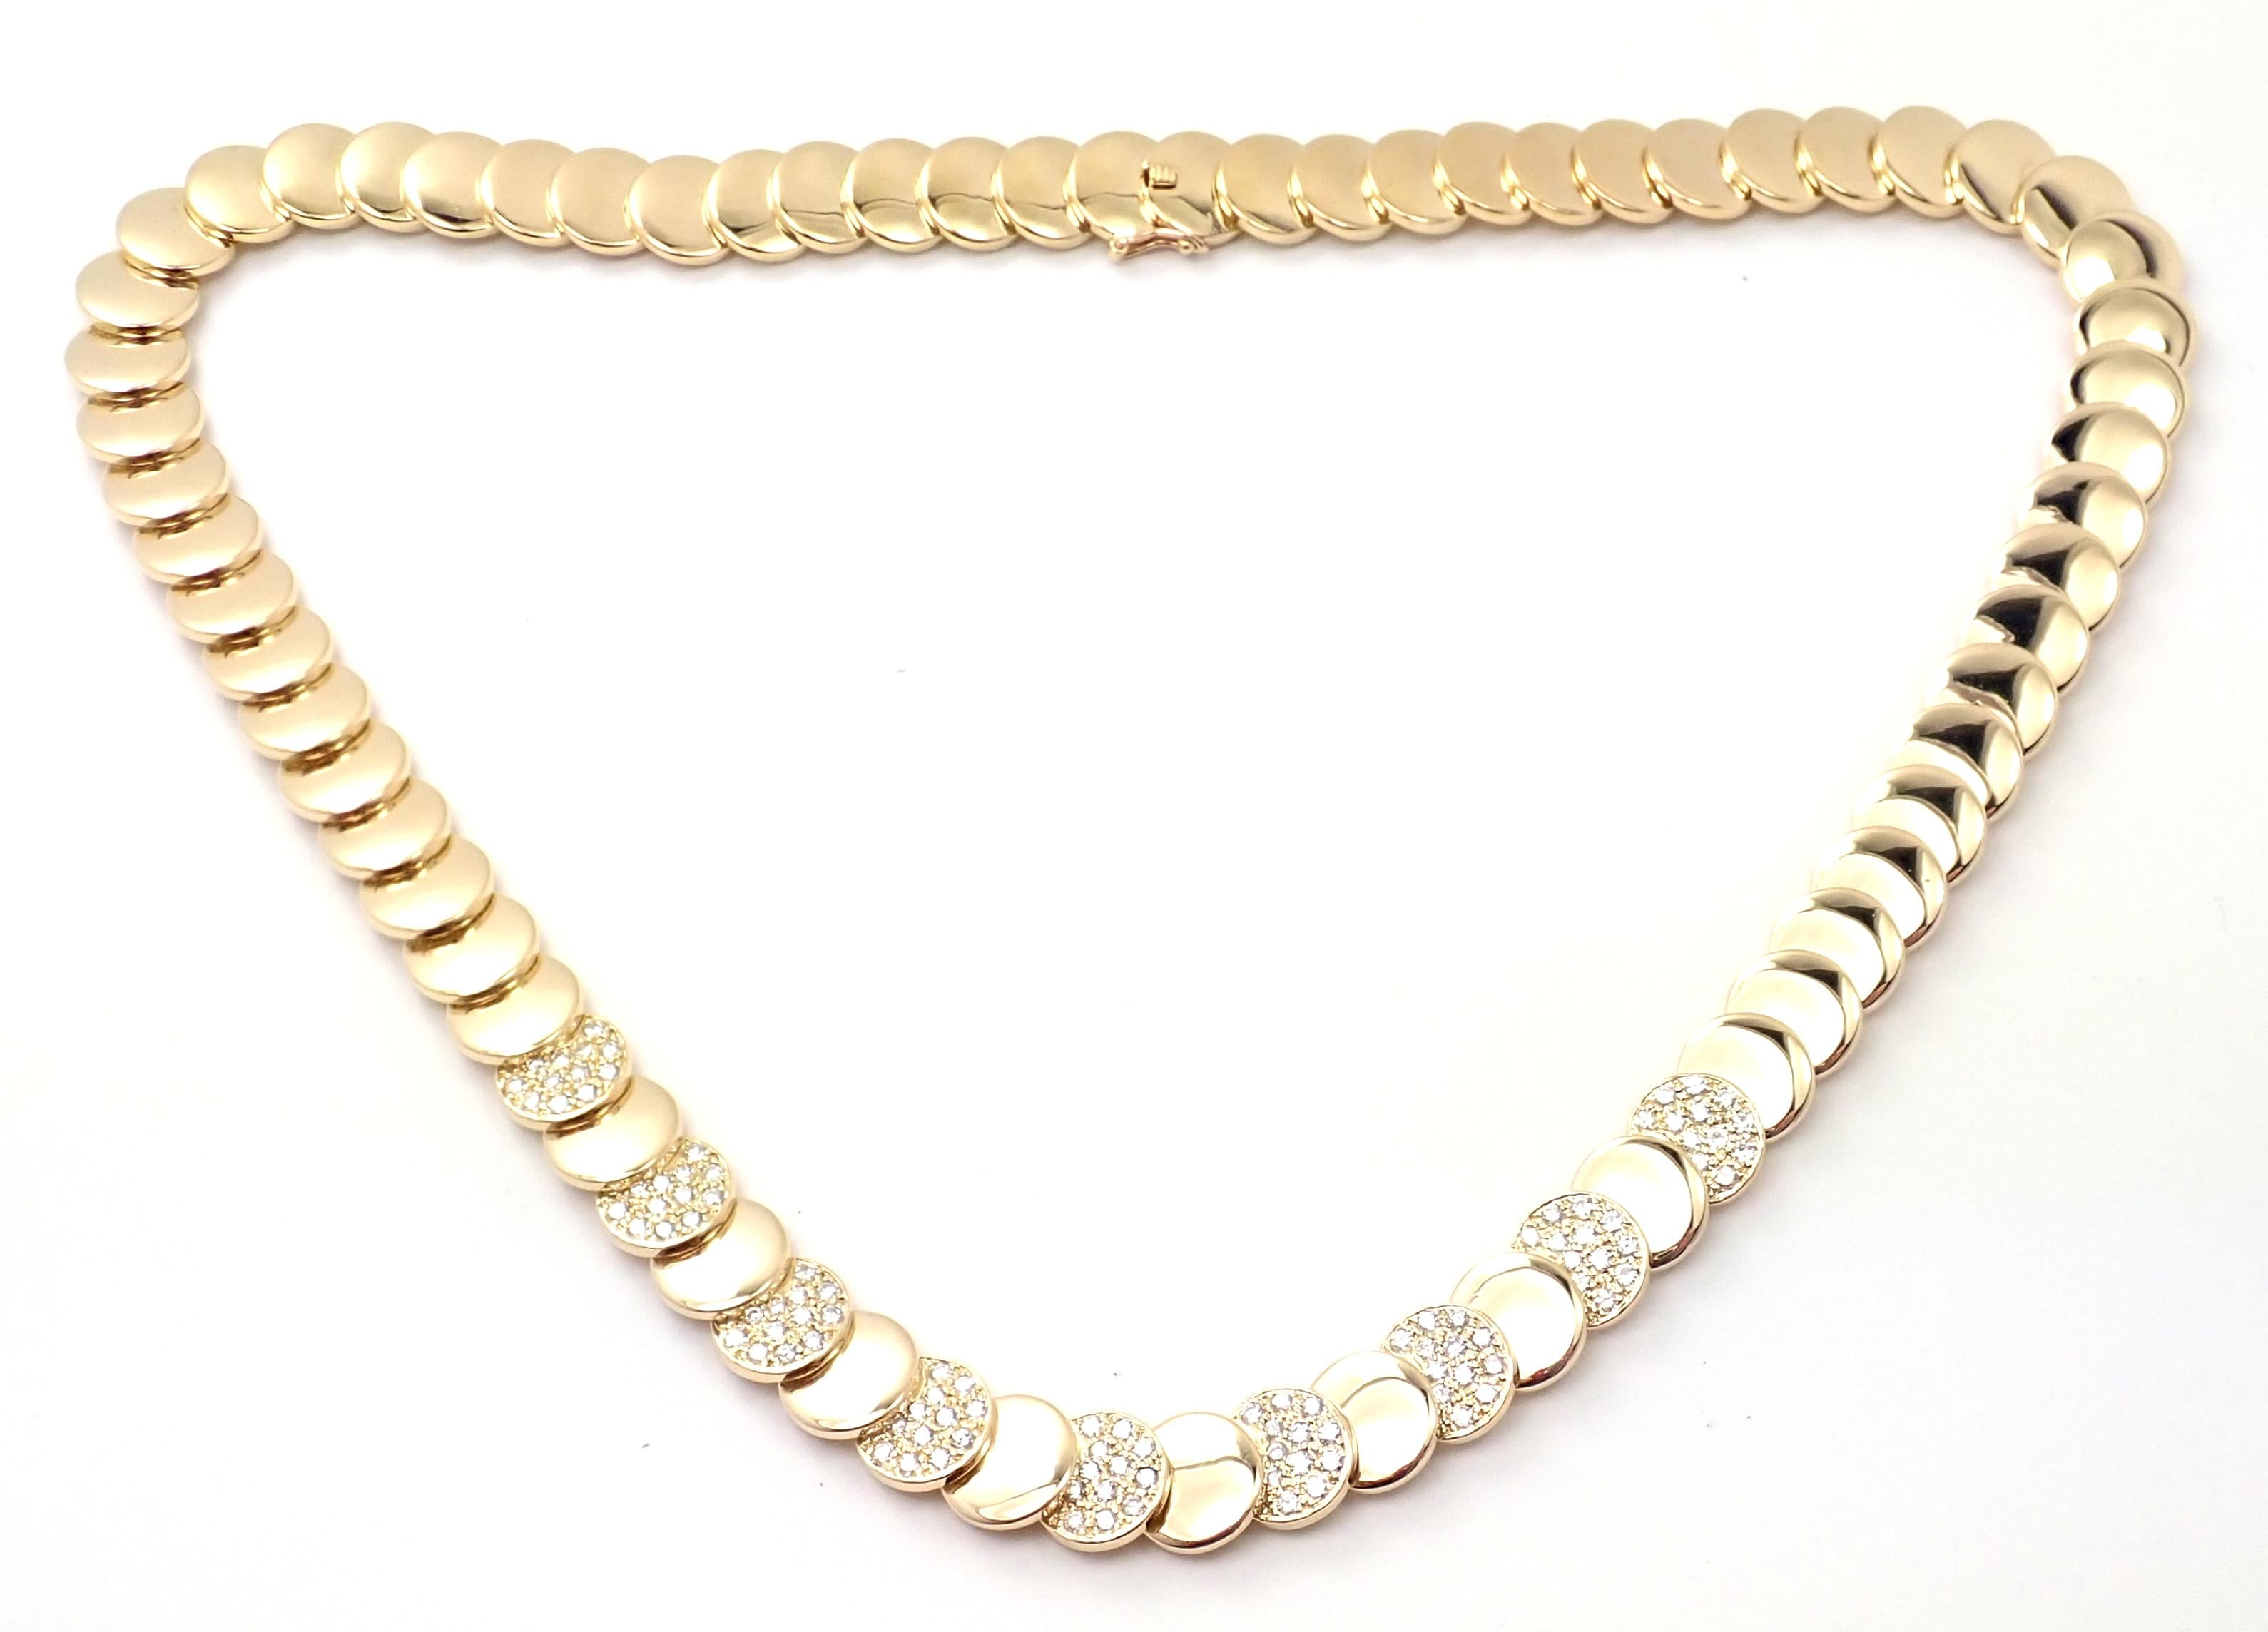 Vintage Van Cleef & Arpels Diamond and Yellow Gold Discs Necklace For Sale 5